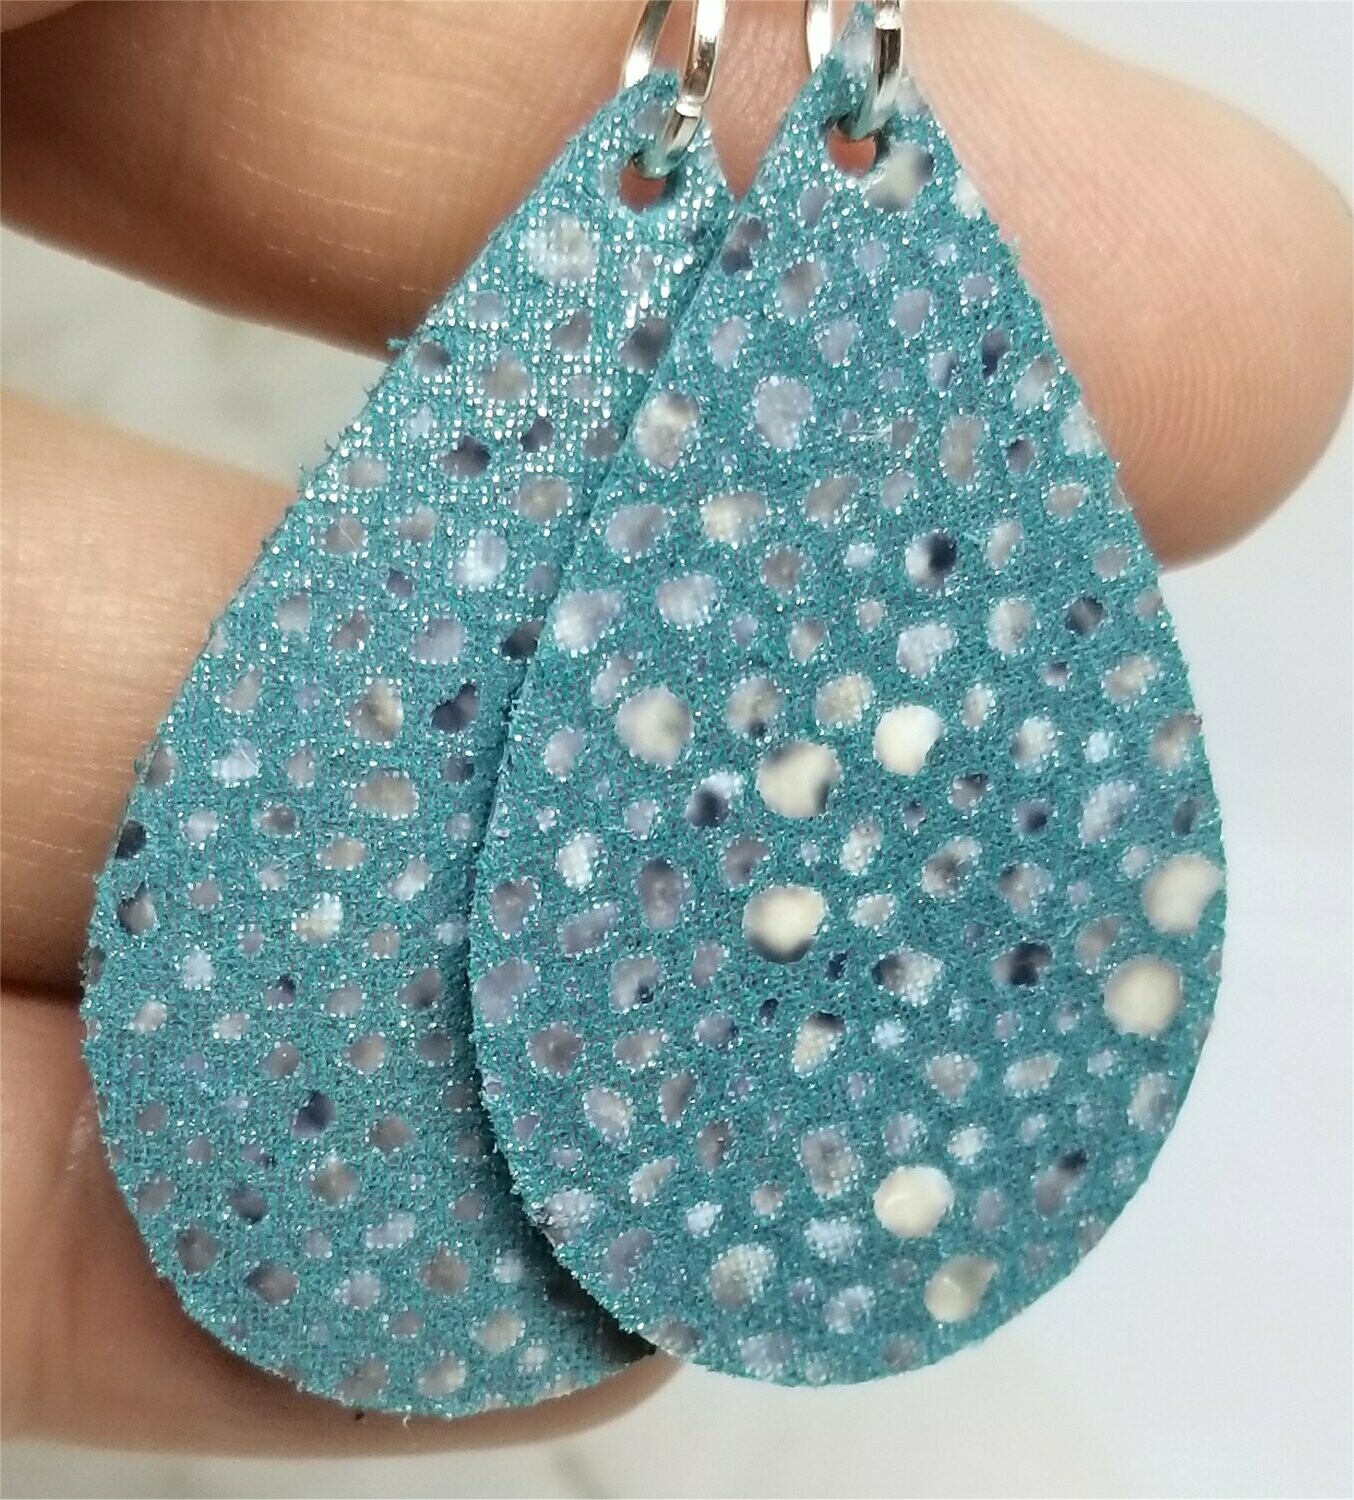 Shimmering Blue and Gray Small Tear Drop Shaped Real Leather Earrings